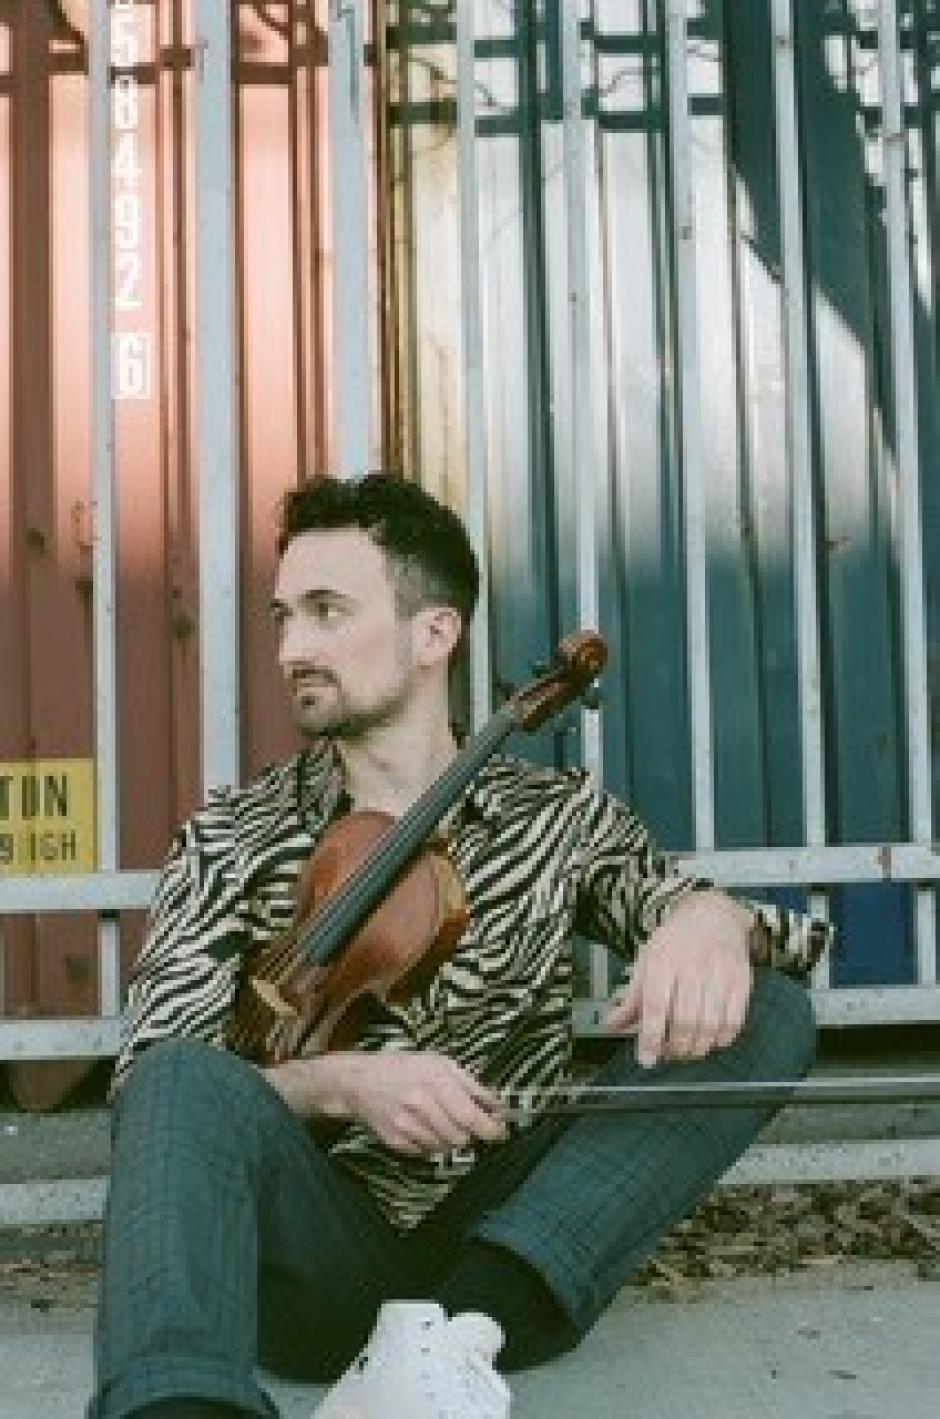 Michael sits in a patterned shirt in front of shipping containers holding a violin. 